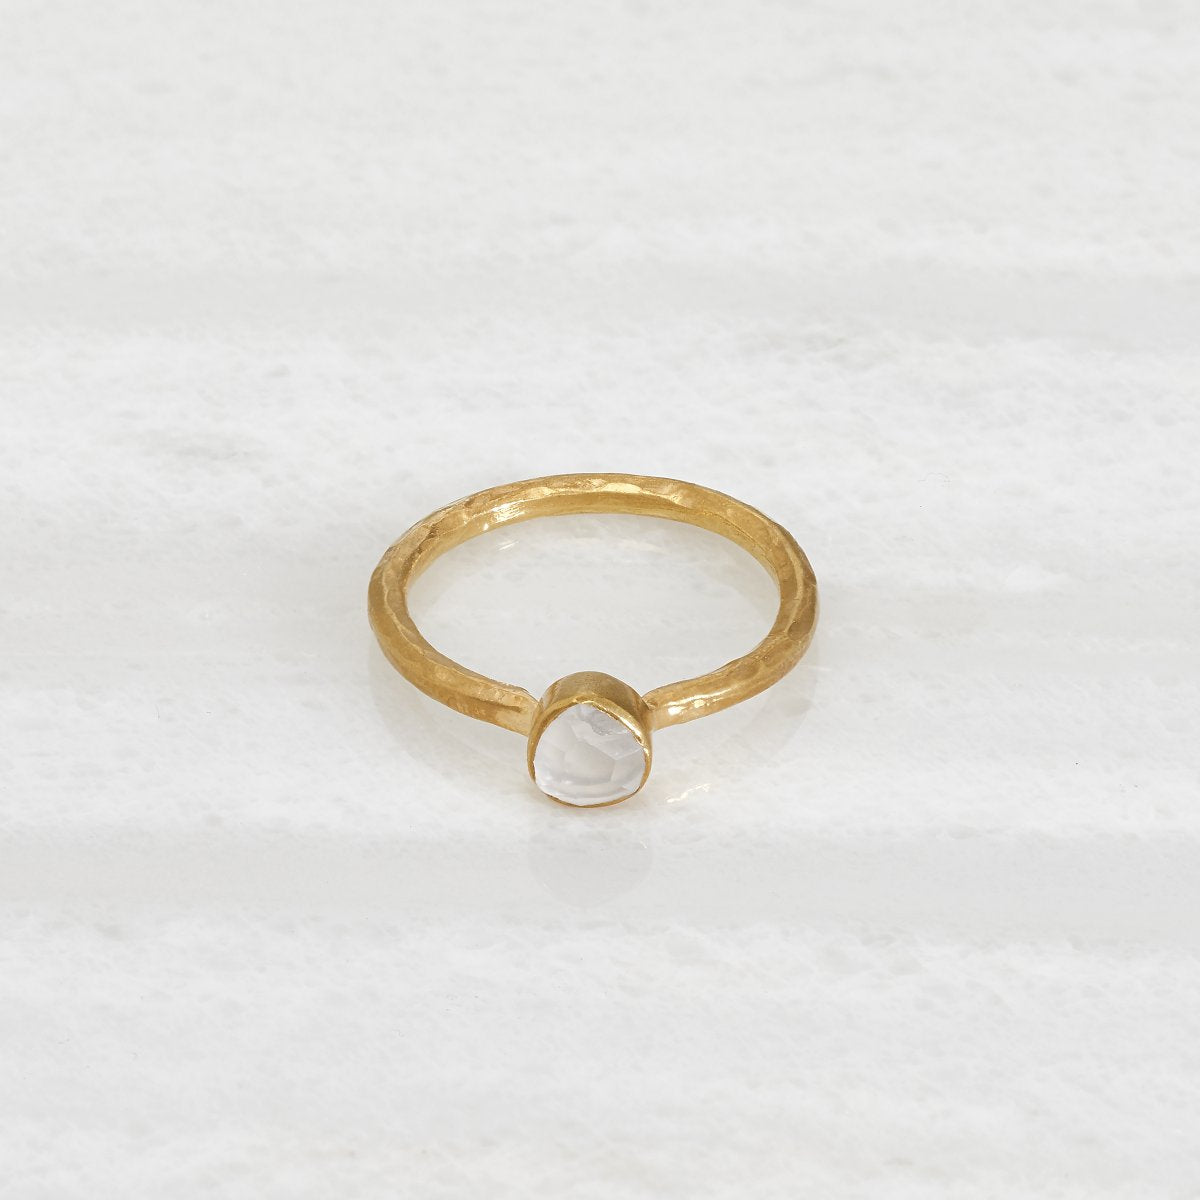 Hammered ring with kunzite stone, gold-plated rings Ishkar   